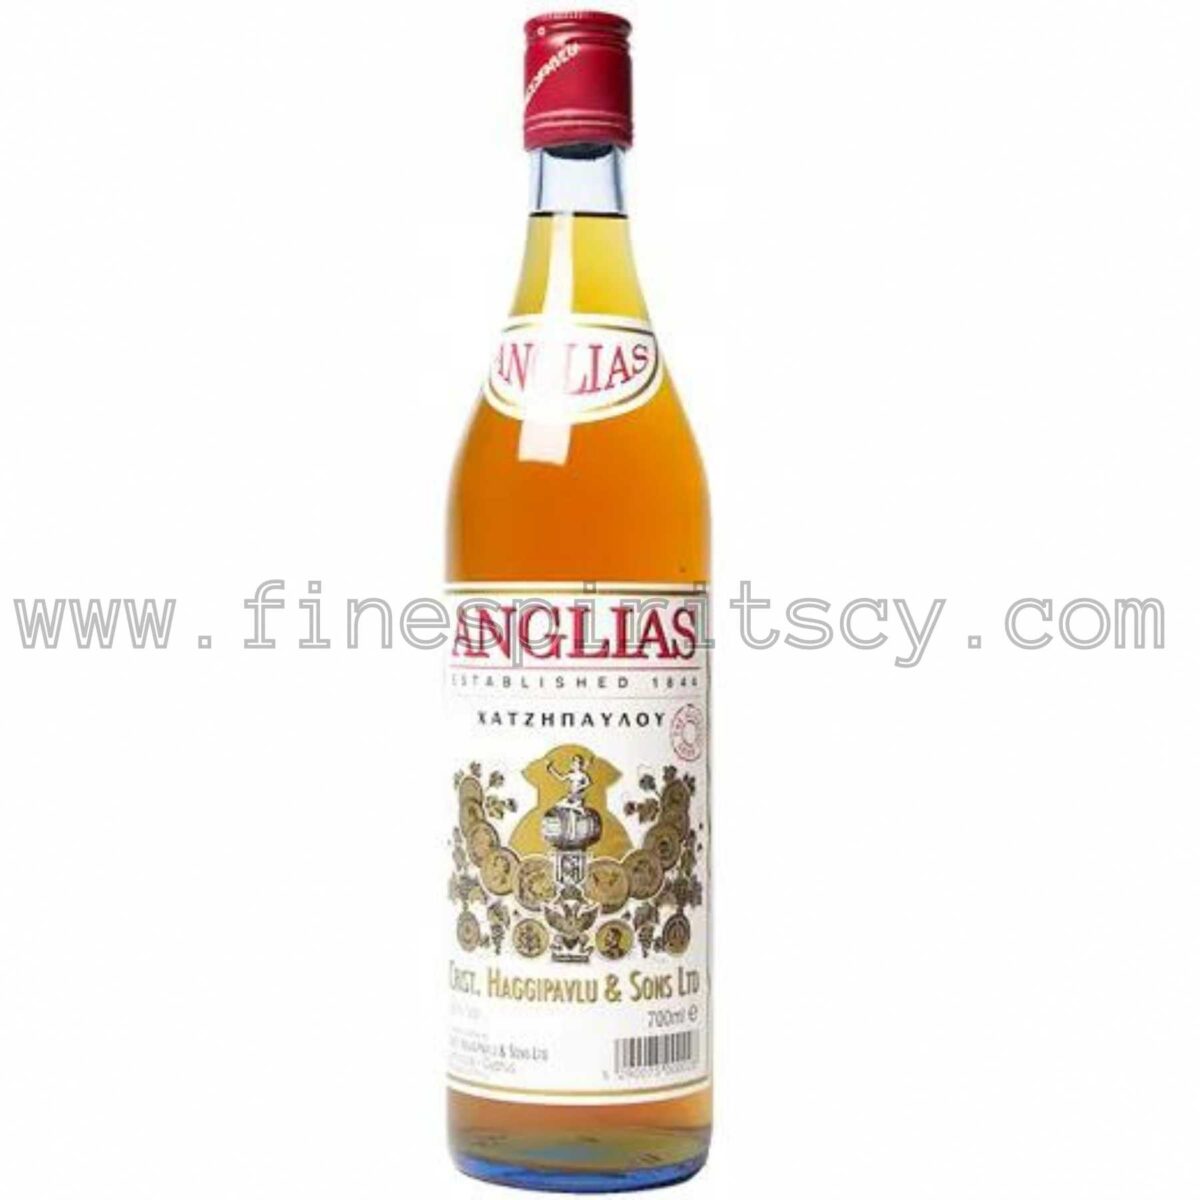 Anglias Brandy Cyprus Cypriot Price Order Online 700ml 70cl 0.7L Whisky CY